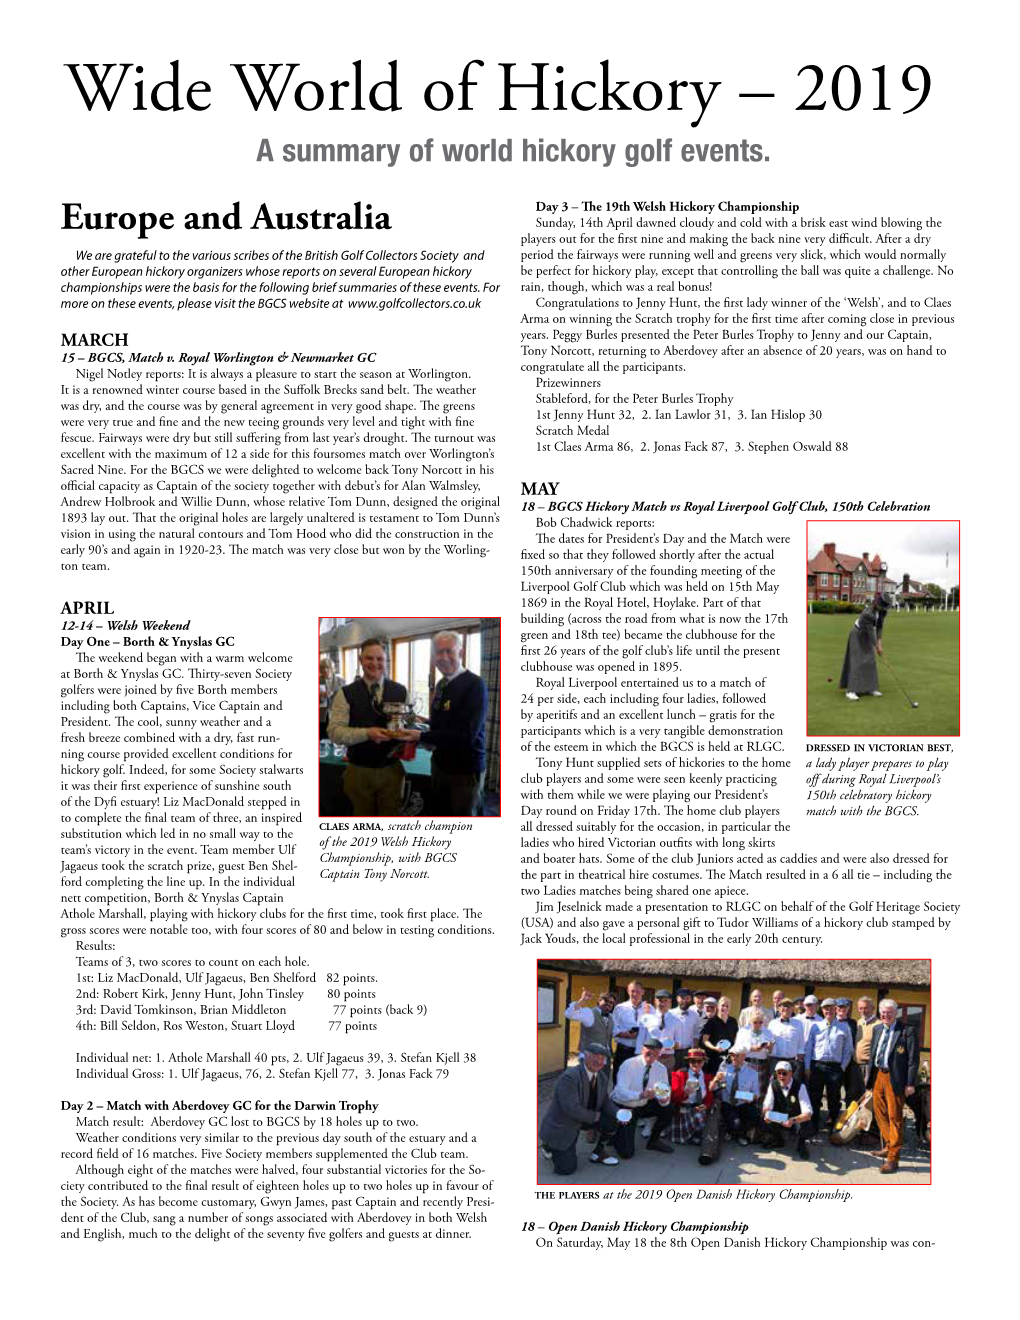 Wide World of Hickory – 2019 a Summary of World Hickory Golf Events